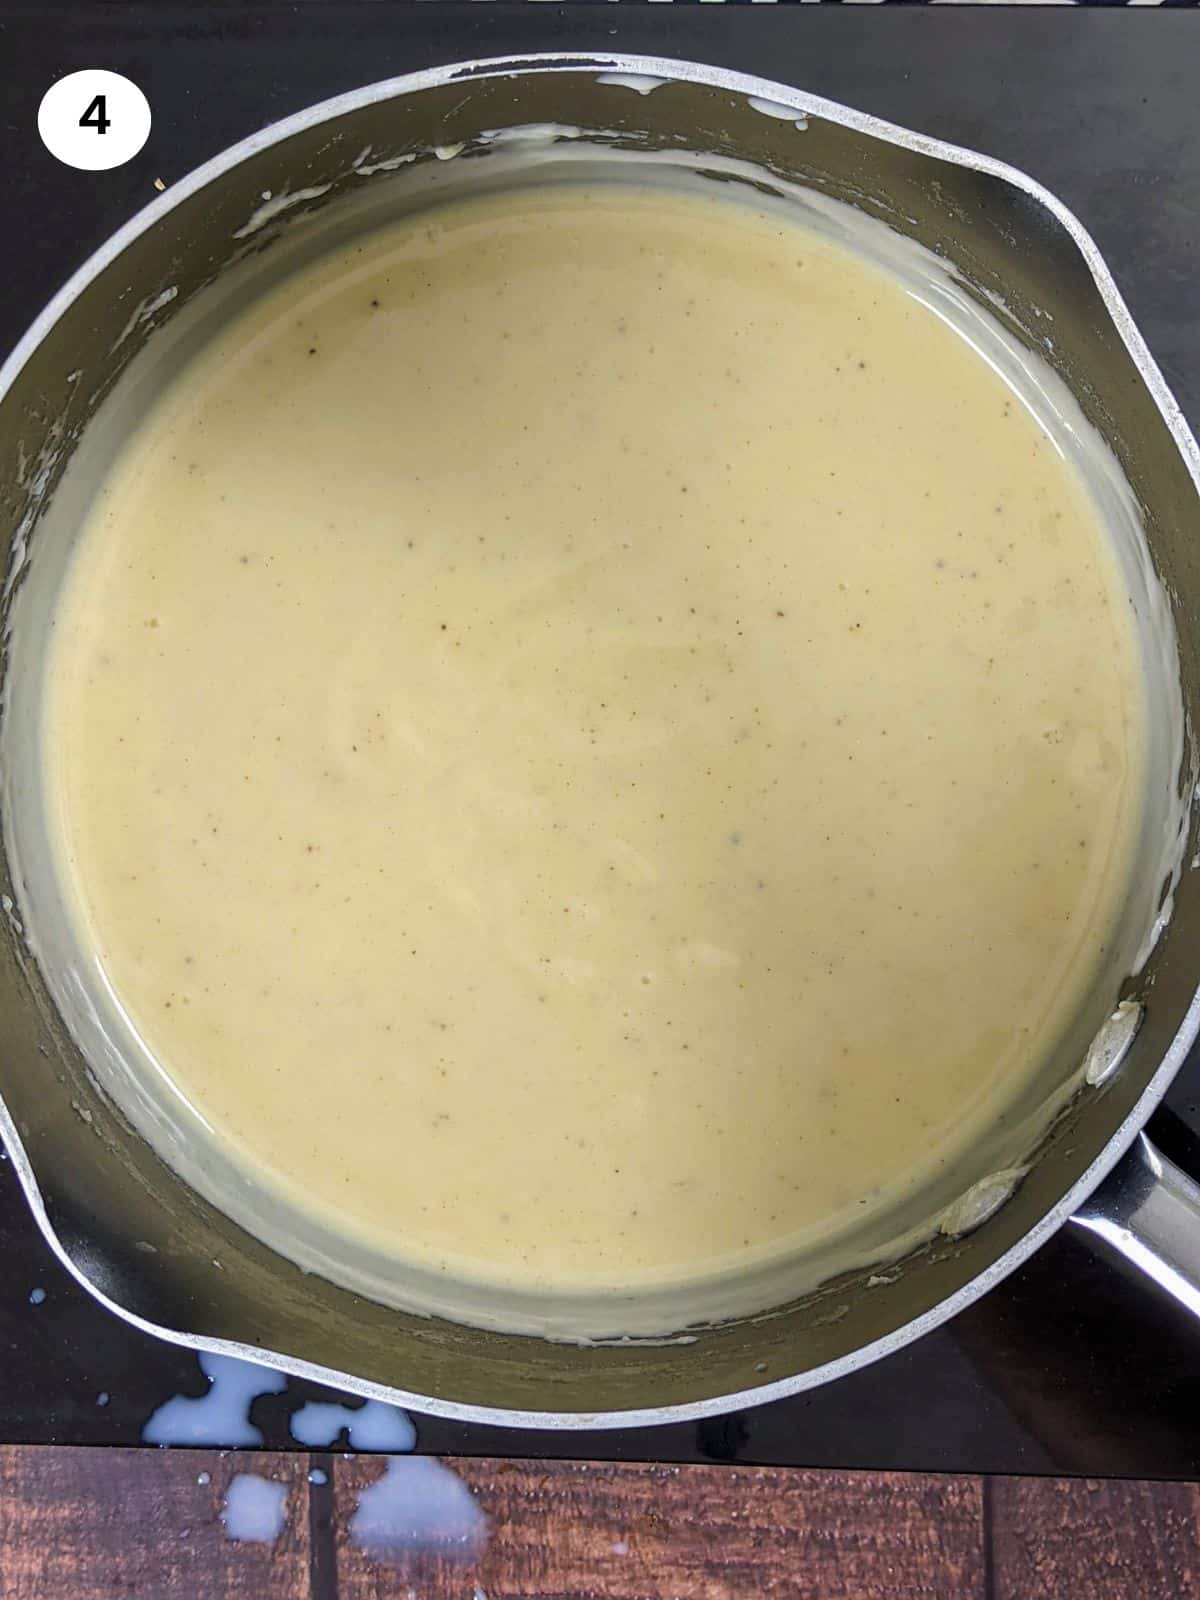 Ready bechamel sauce with spices and egg yolk incorporated